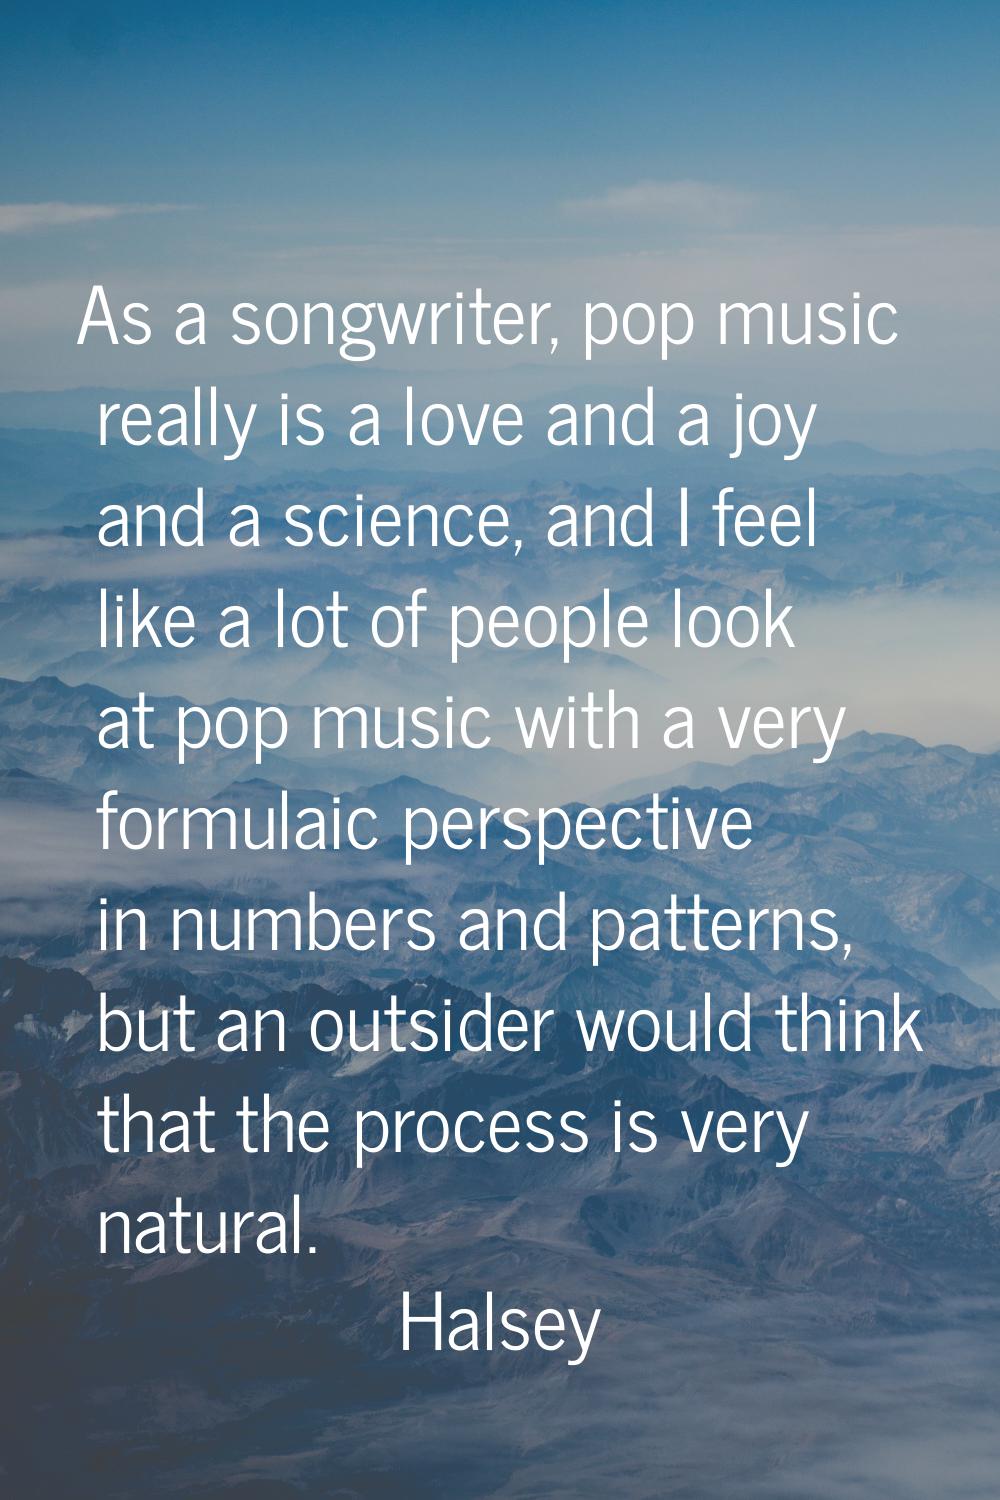 As a songwriter, pop music really is a love and a joy and a science, and I feel like a lot of peopl